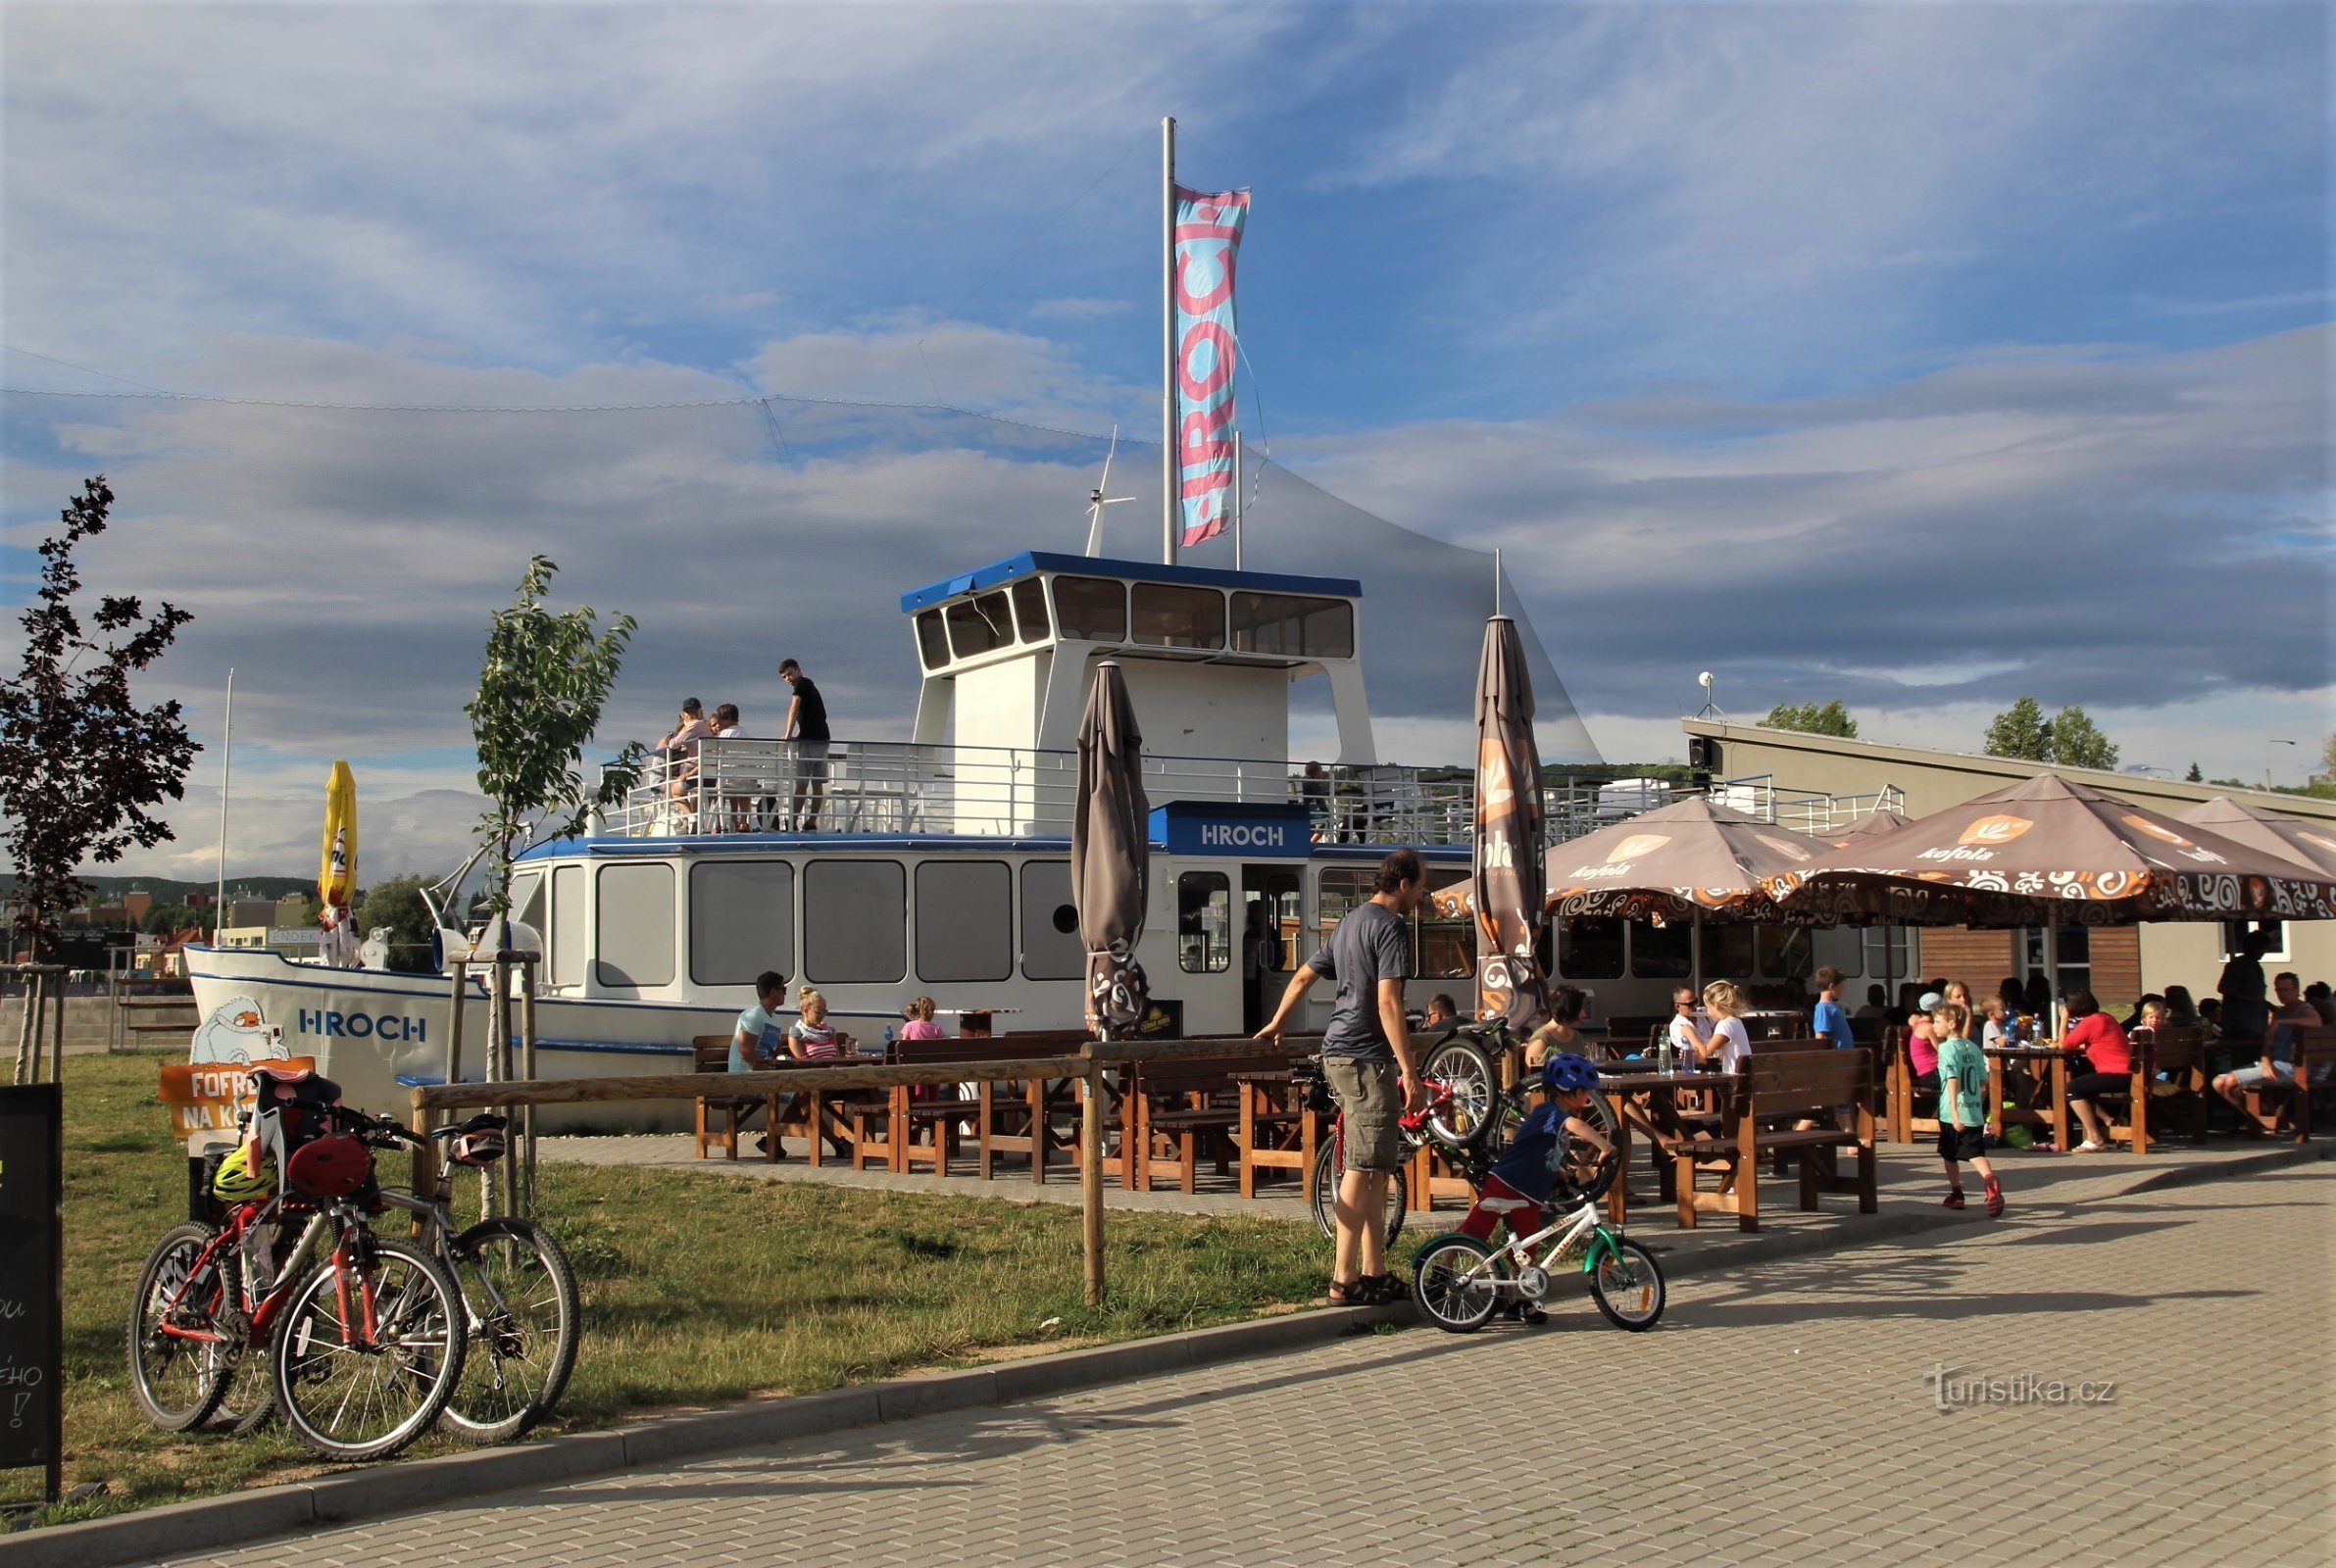 In the center of the complex is the Hroch steamboat, which serves as a seasonal bistro